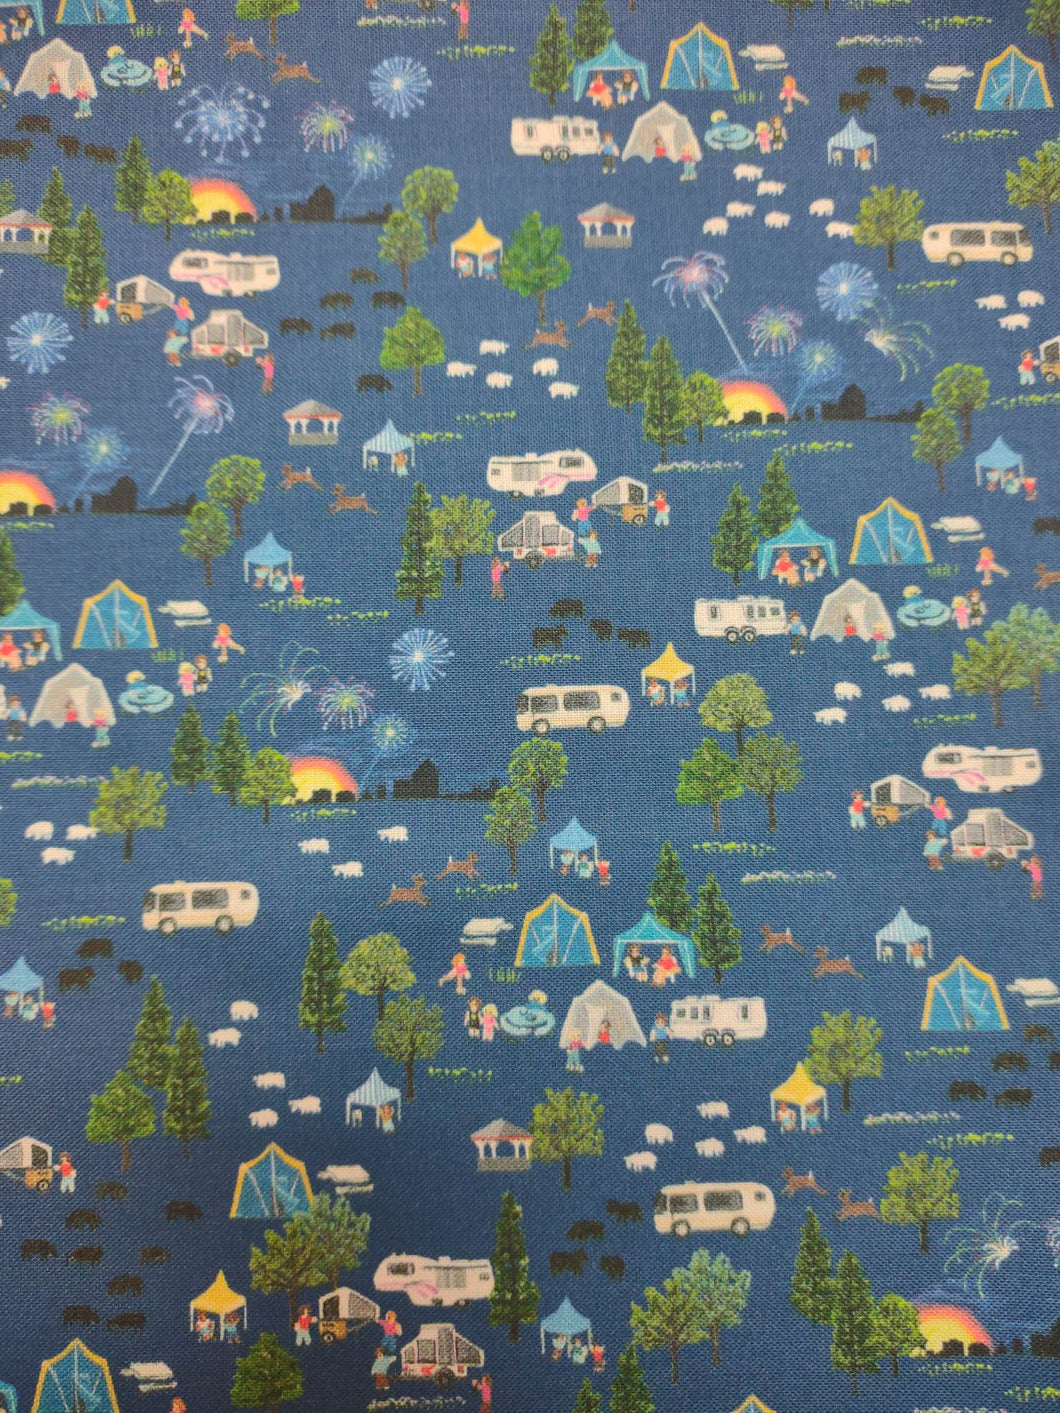 2023 All Iowa Shop Hop Camping Scene Fabric by the Yard